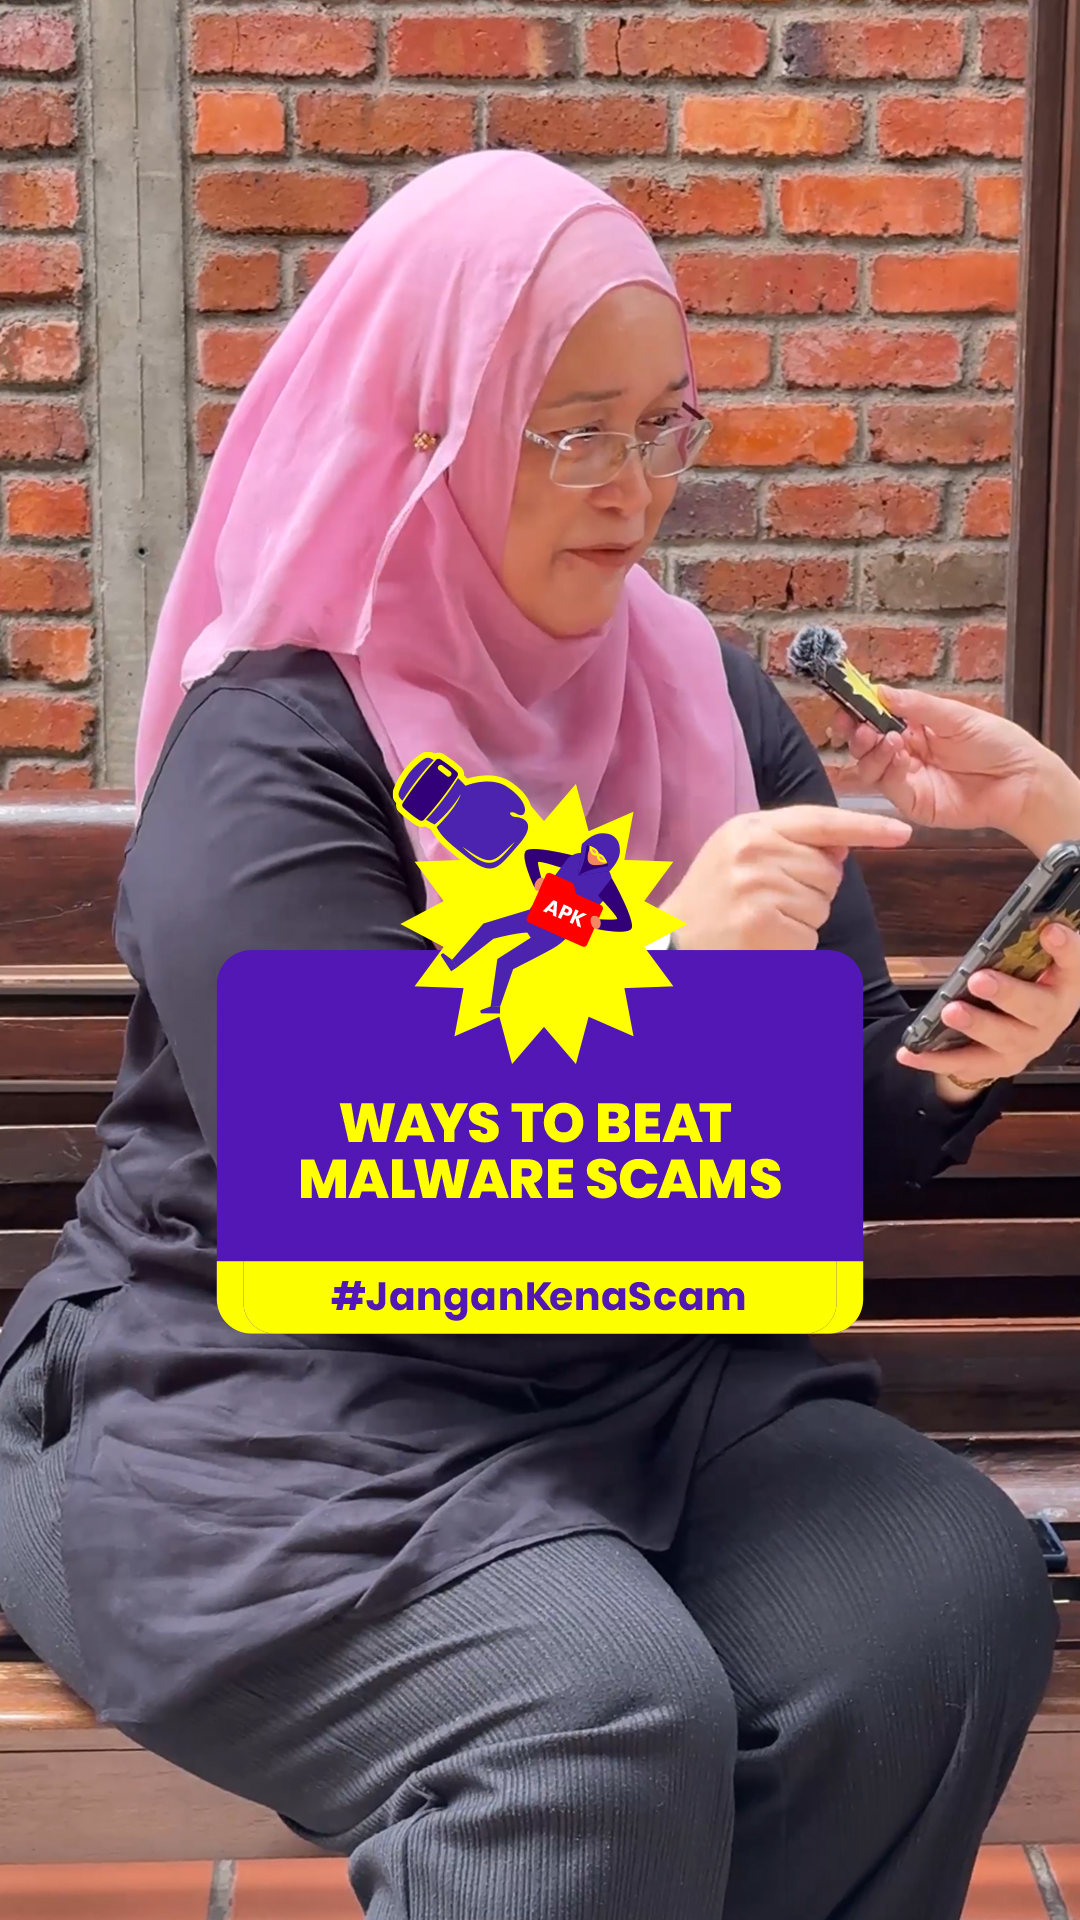 Image for #JanganKenaScam: Remember to never click on any .APK files or allow control access to your device.